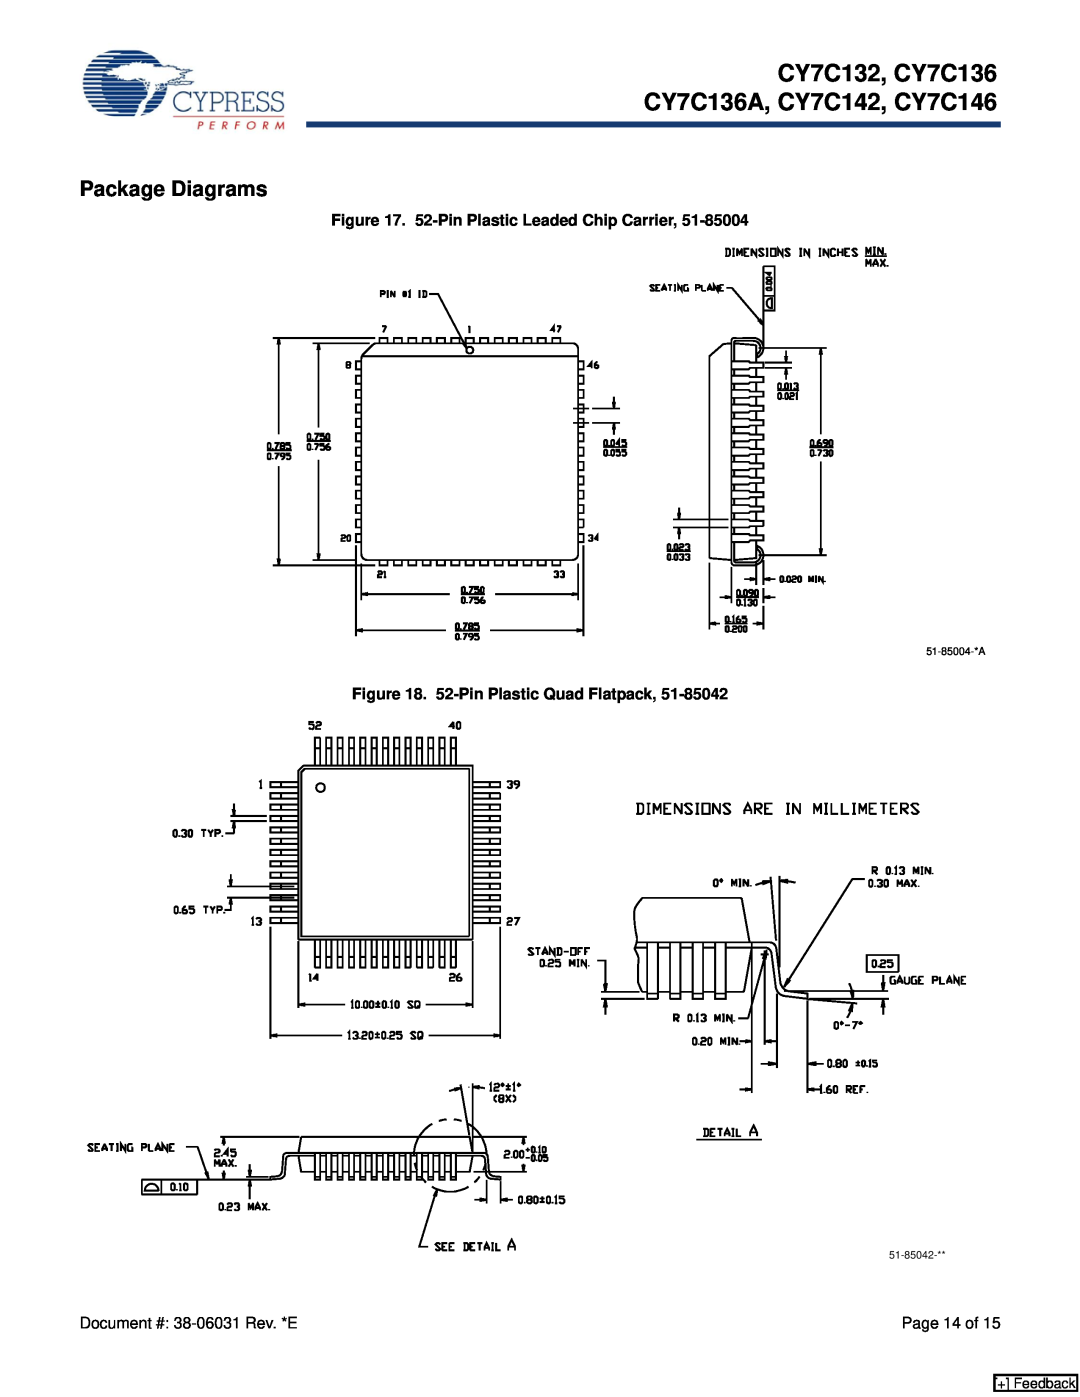 Cypress Package Diagrams, CY7C132, CY7C136 CY7C136A, CY7C142, CY7C146, 52-Pin Plastic Leaded Chip Carrier, + Feedback 